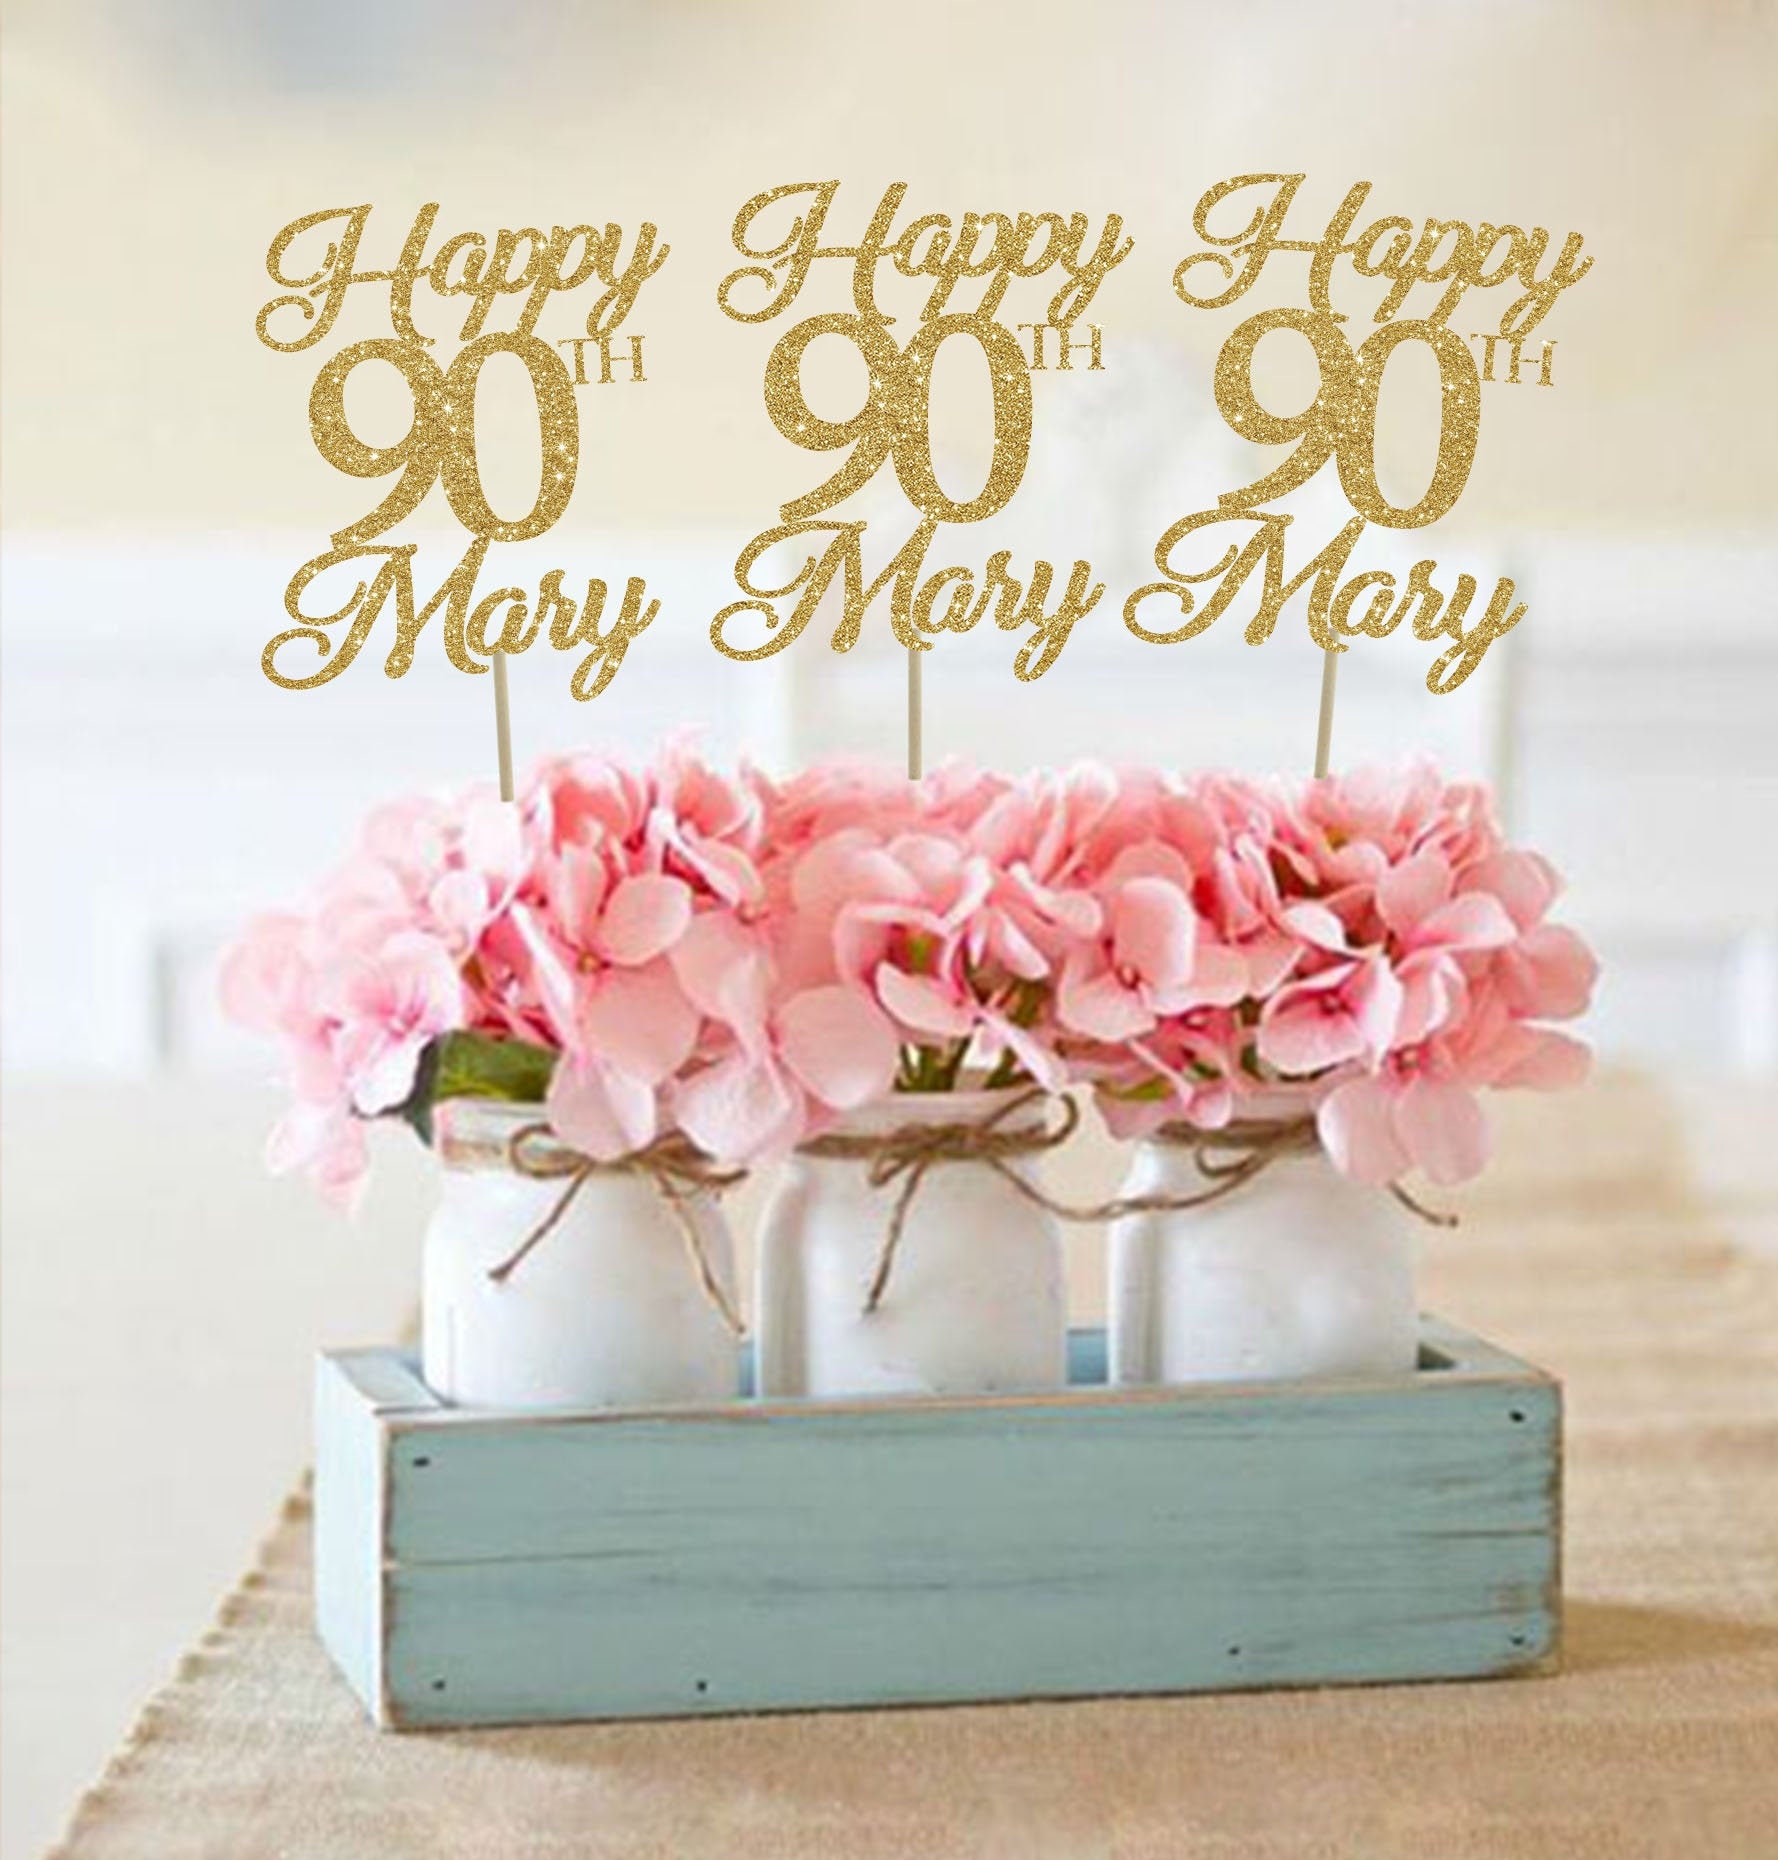 90th Birthday Centerpieces 90 Centerpieces 90th Birthday Party - Etsy